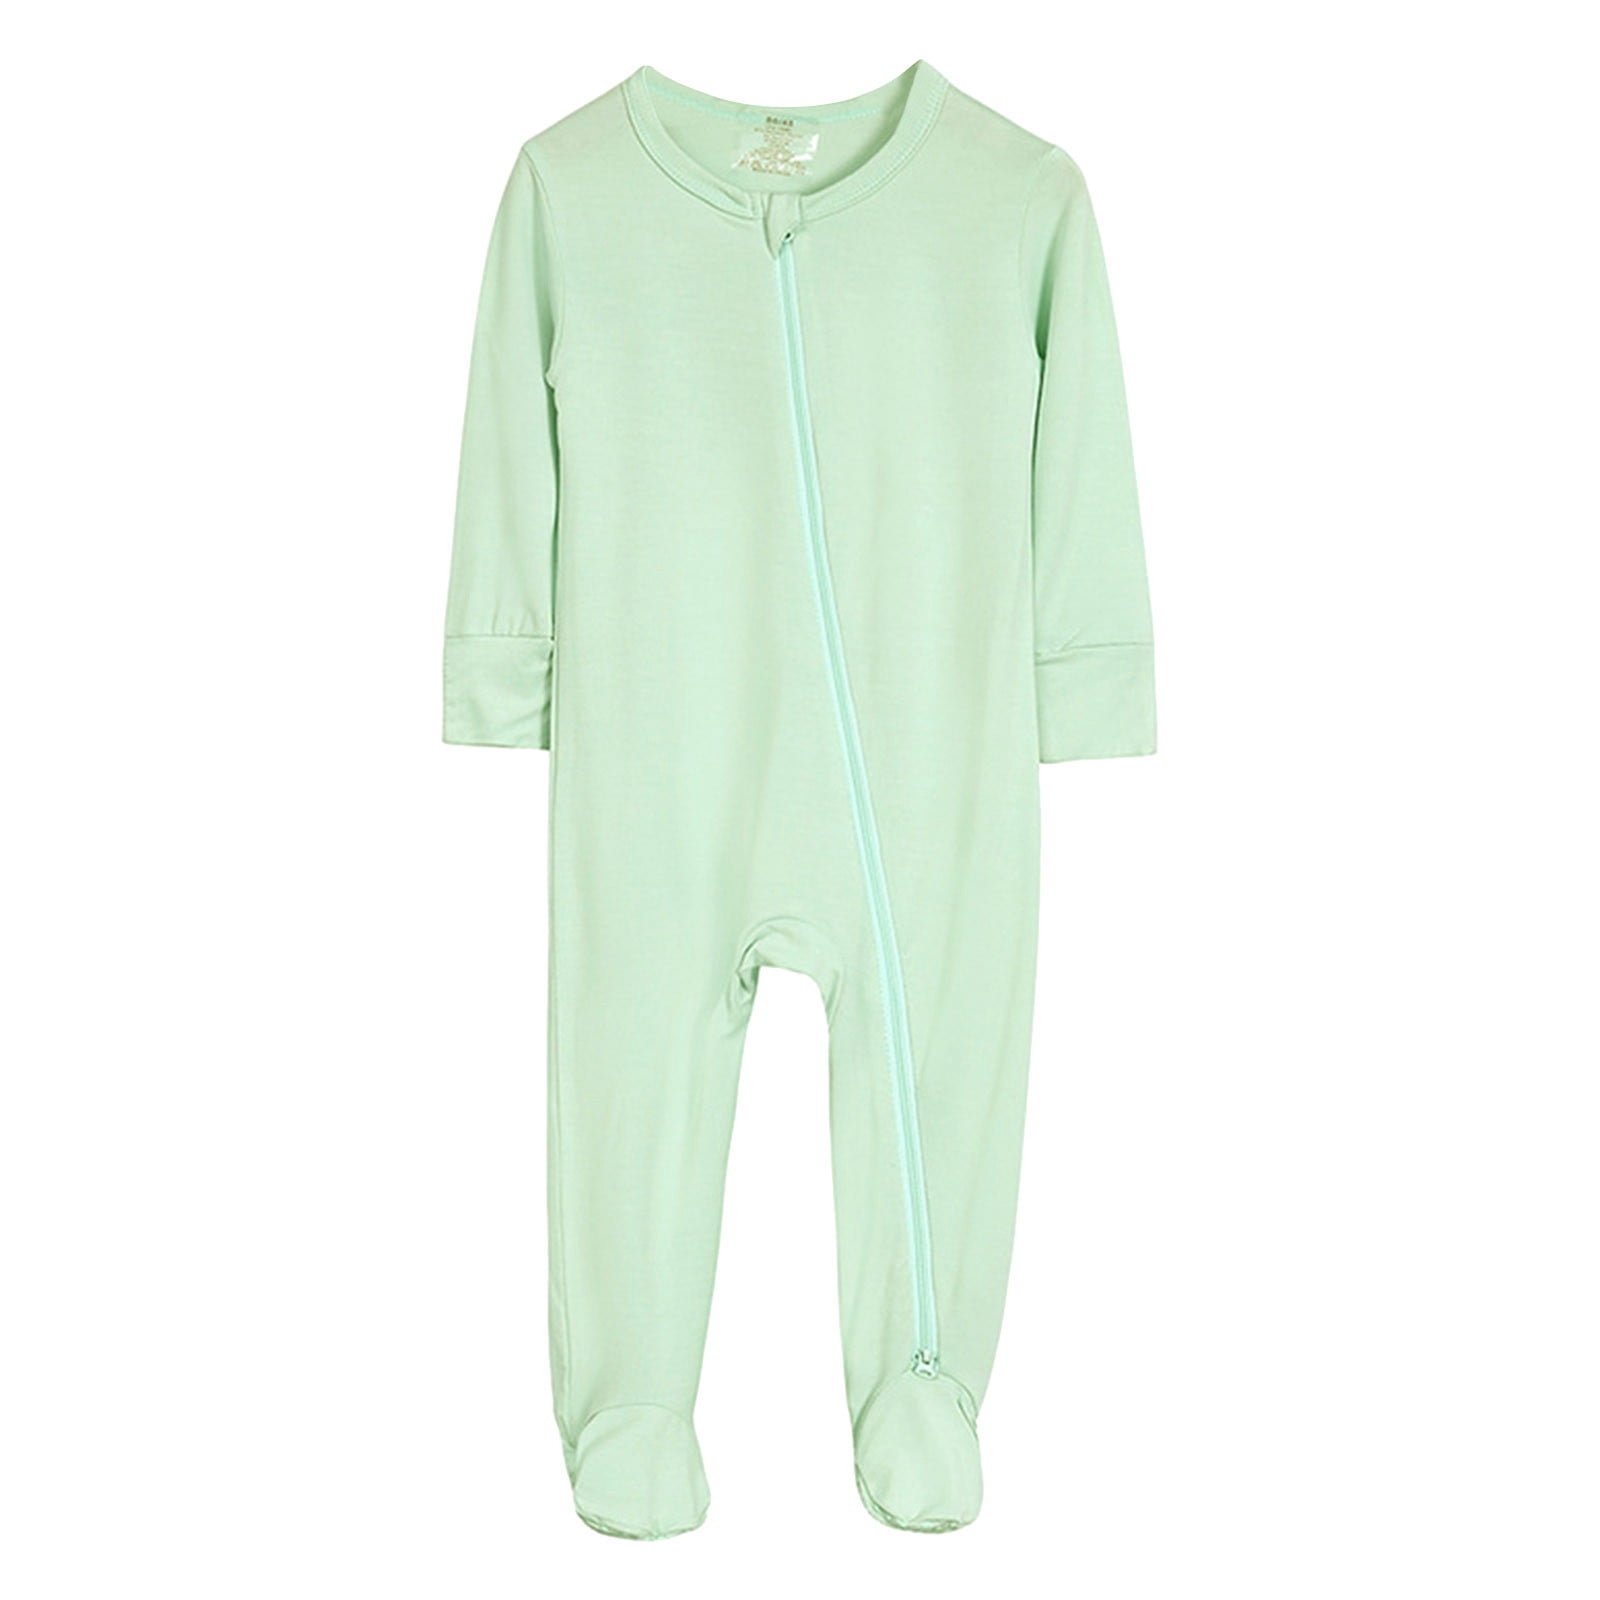 Infant Baby Boys Cotton Rompers Footed Pajamas Zipper Long Sleeve ...